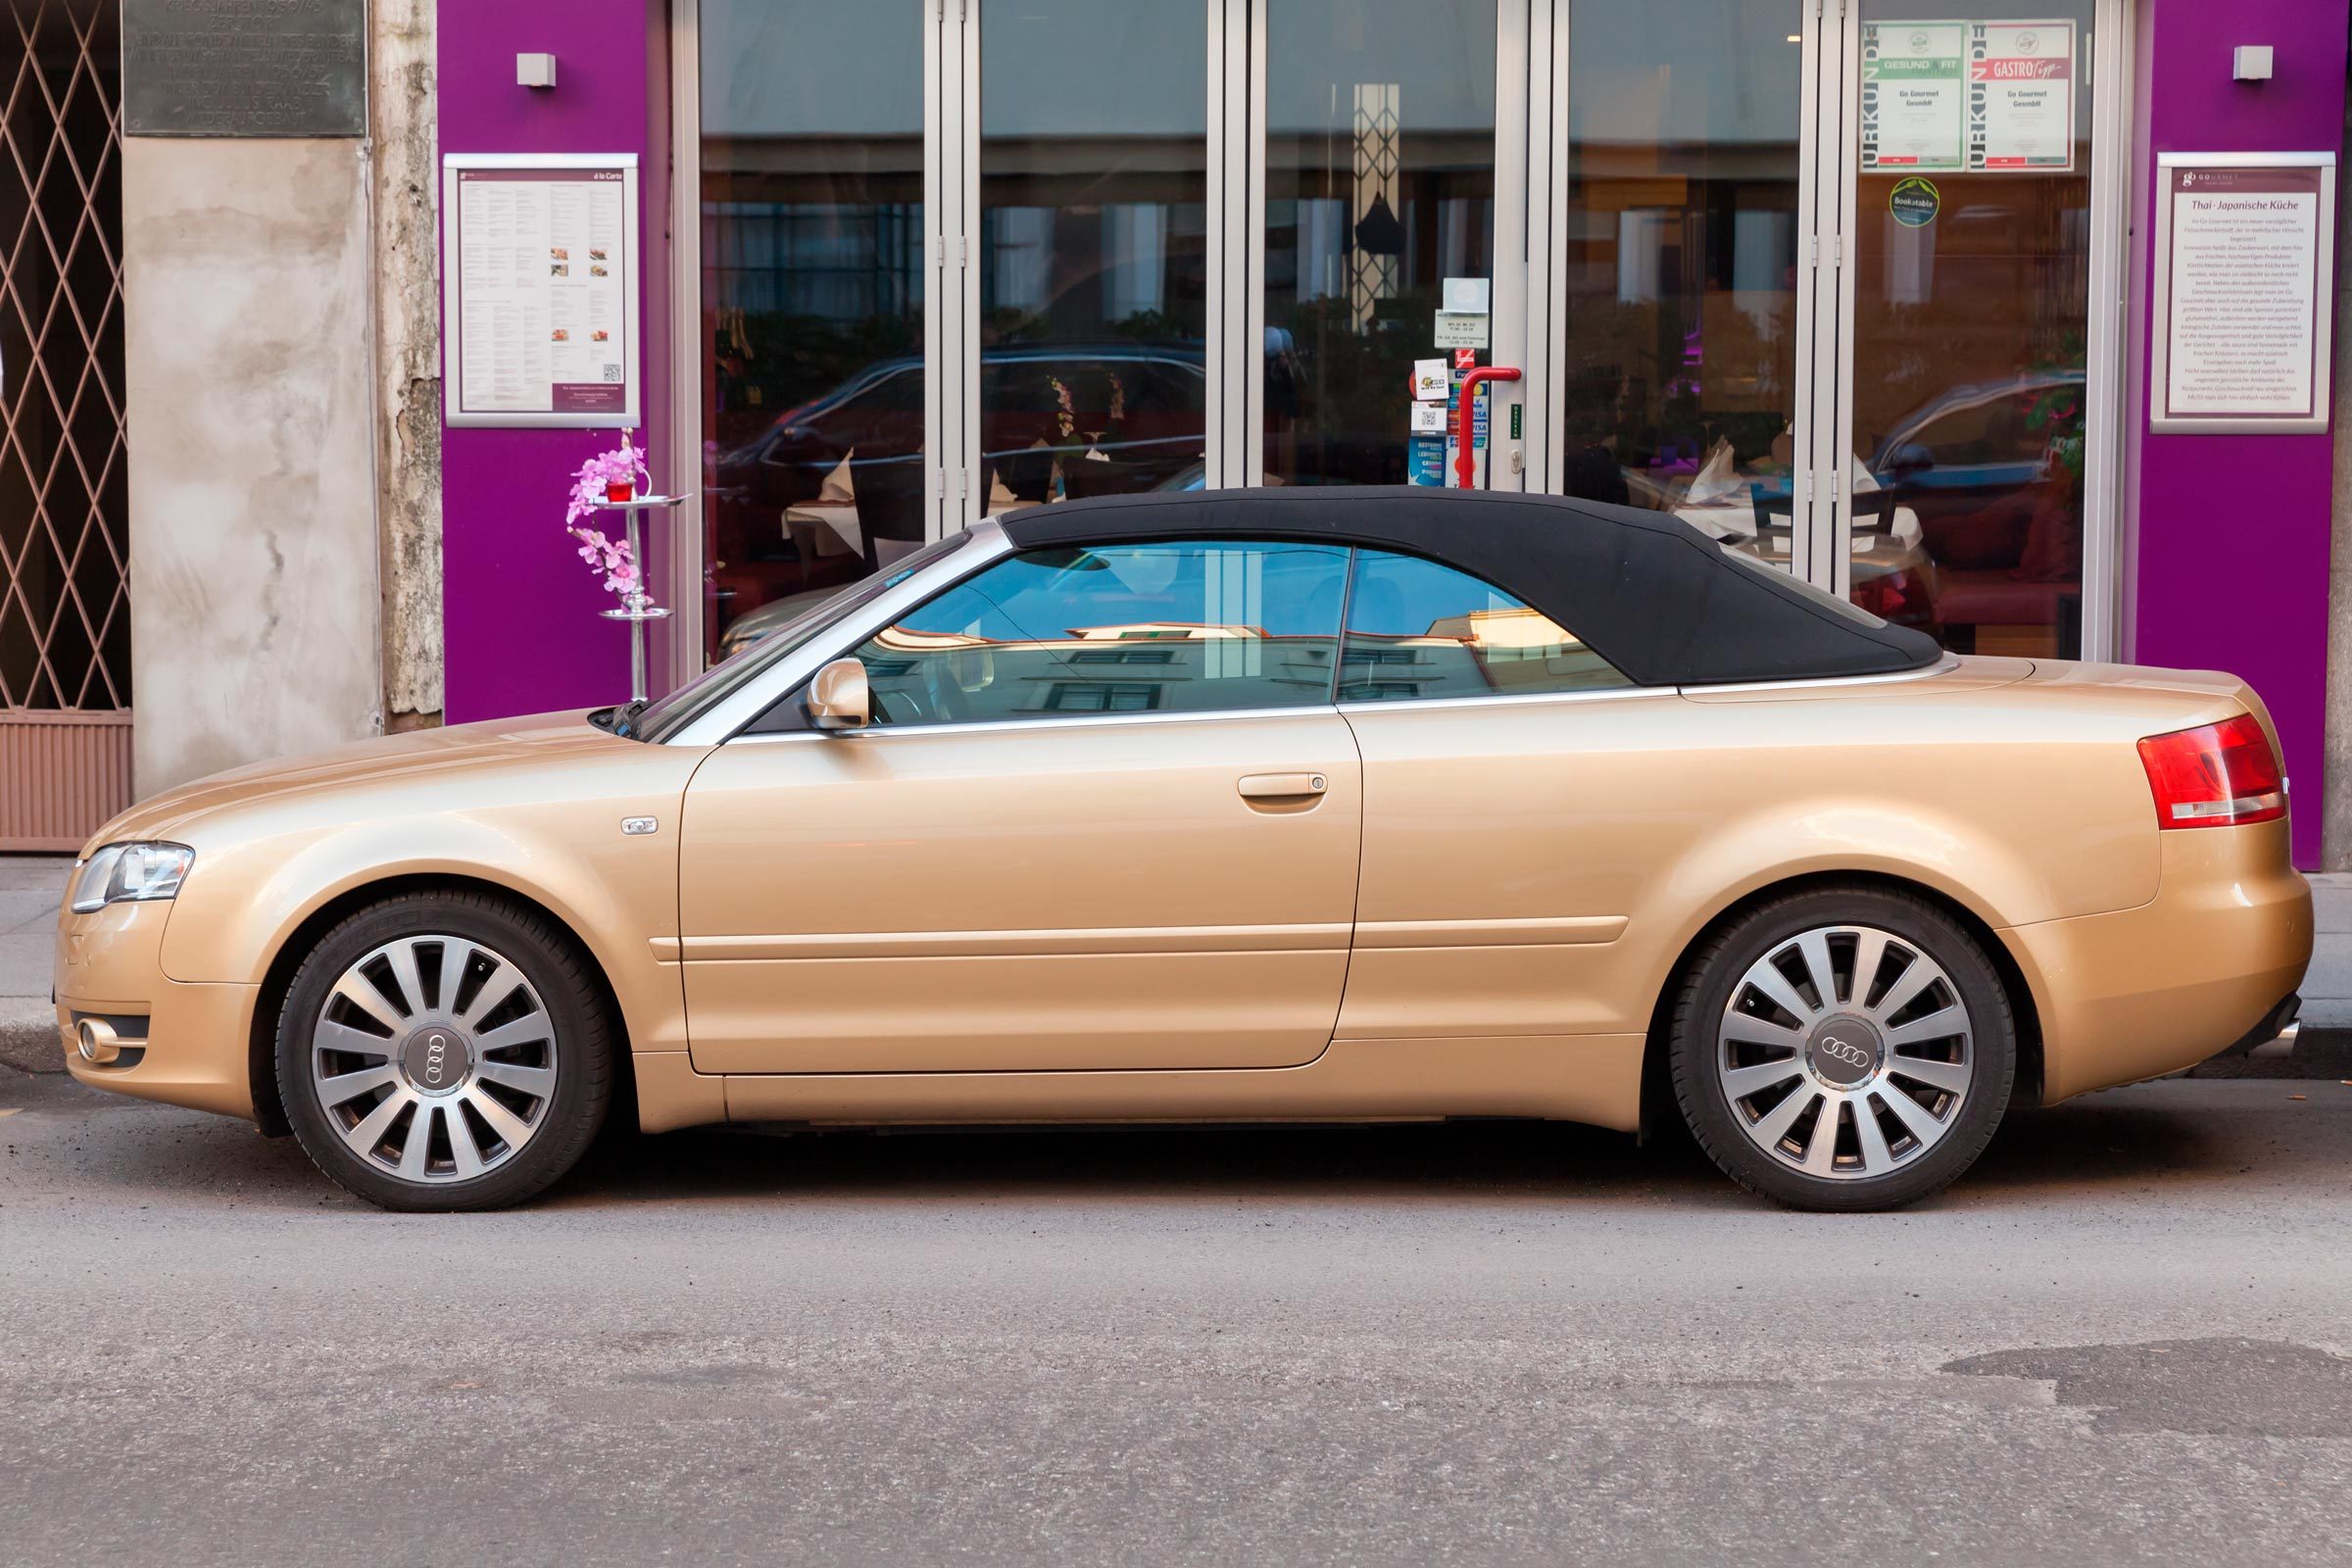 metallic gold Audi A4 Cabriolet stands on the city street